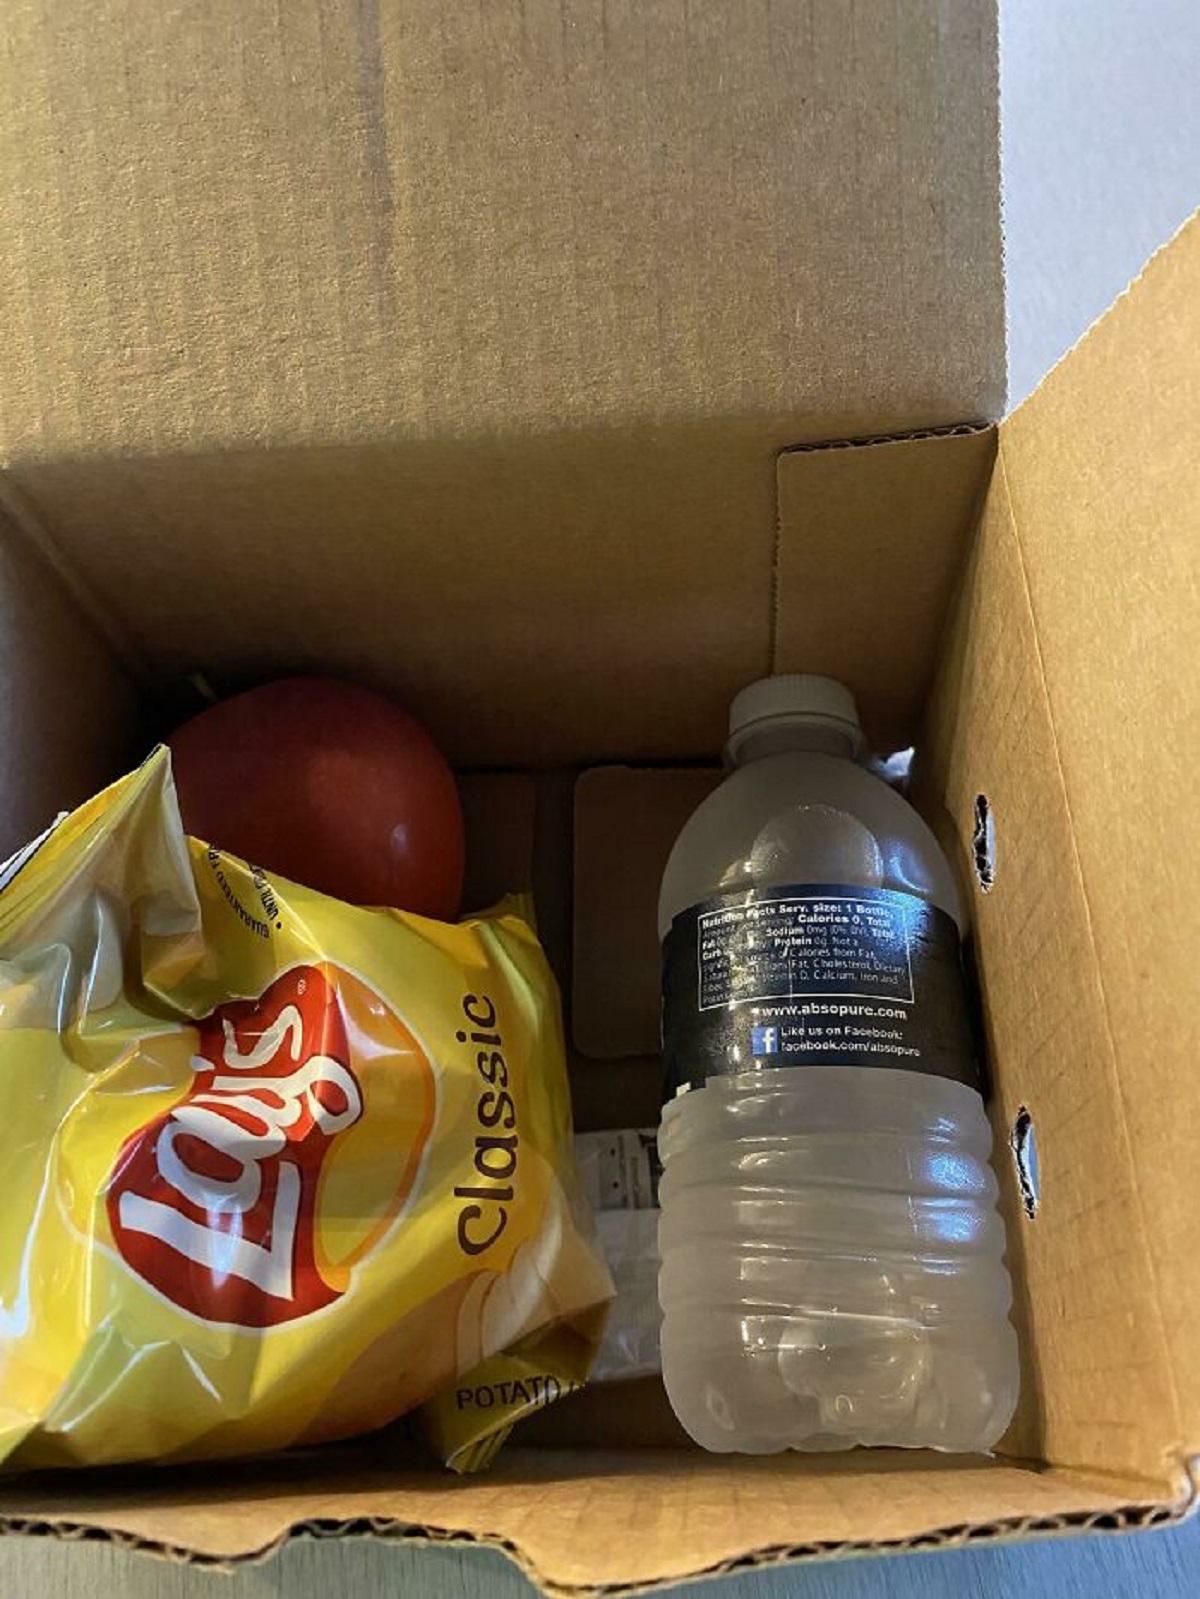 I Work At A College Dorm. This Week Is Freshman Move In Where I’m Working A 12 Hour Shift. I Was Told Not To Pack A Lunch Because A Free One Is Provided. This Is My Free “Meal”